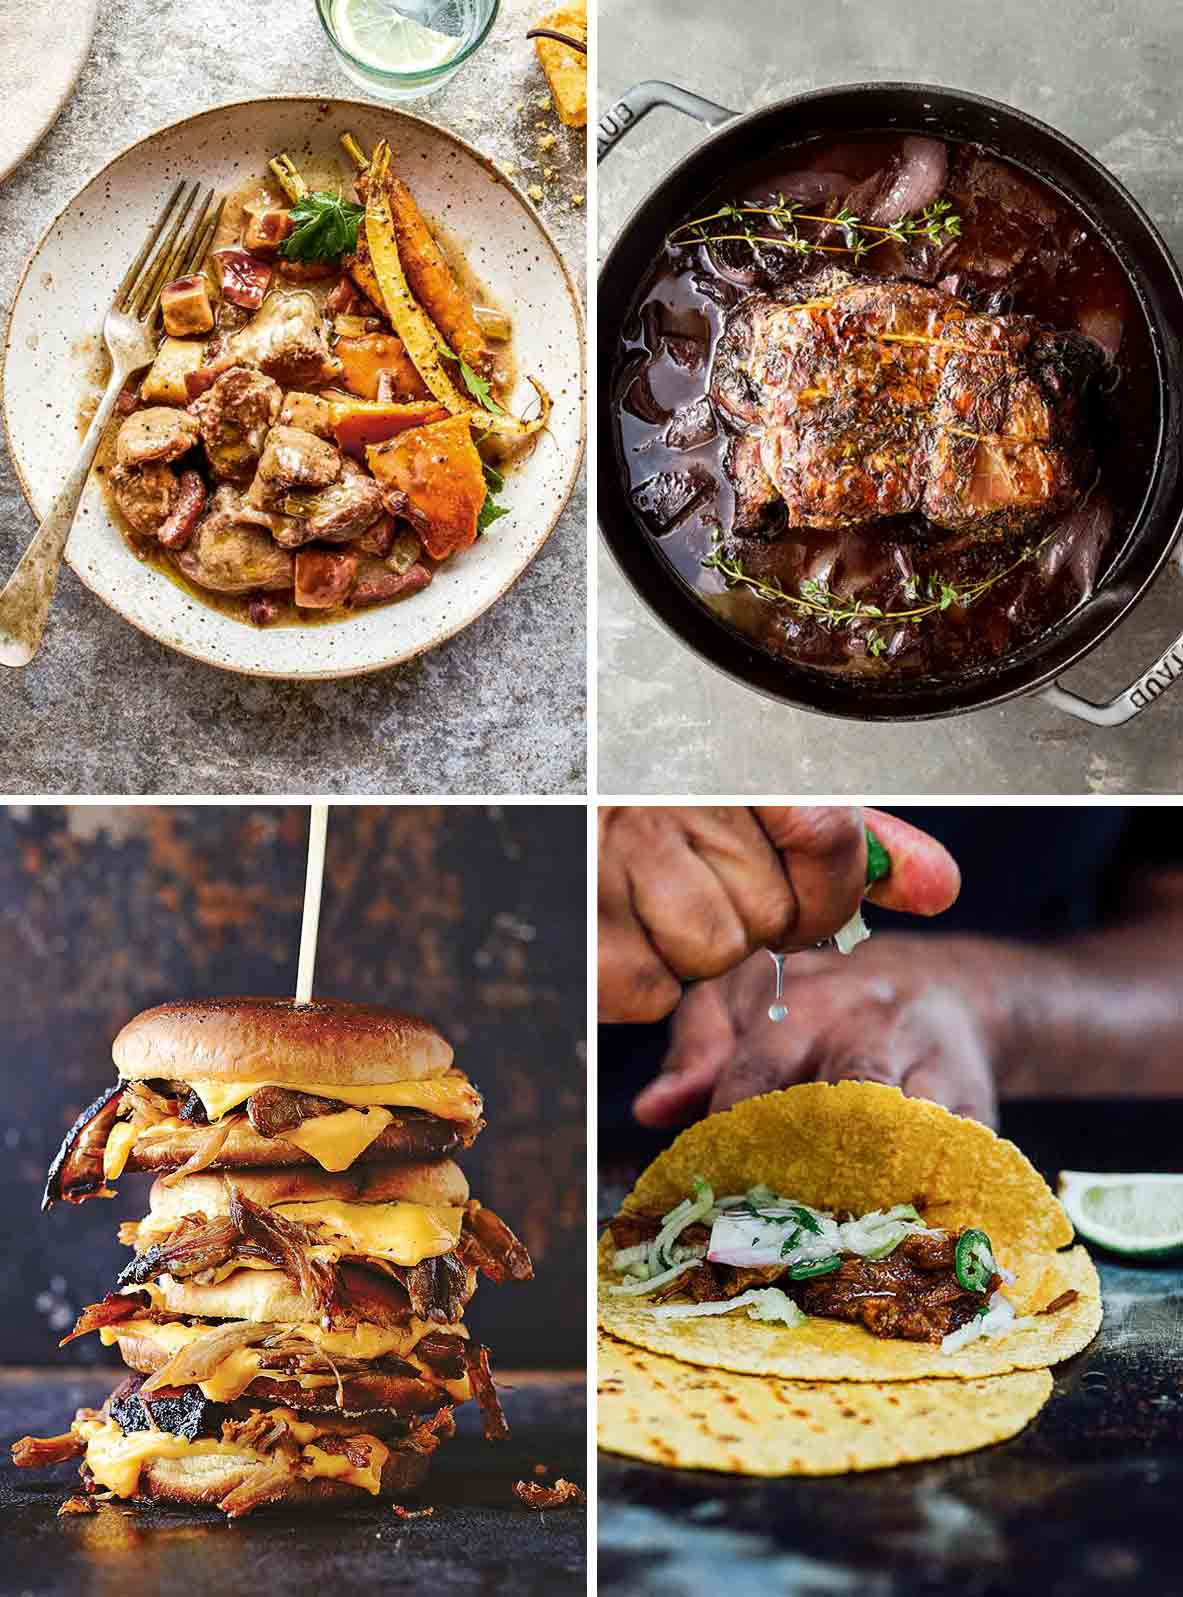 Four pork butt recipes: a plate of pork-butt casserole with apples and carrots; a pork butt in wine in a black pot; a pork-butt burger layered with bacon and cheese; a pork-butt taco with a man's hand folding it.